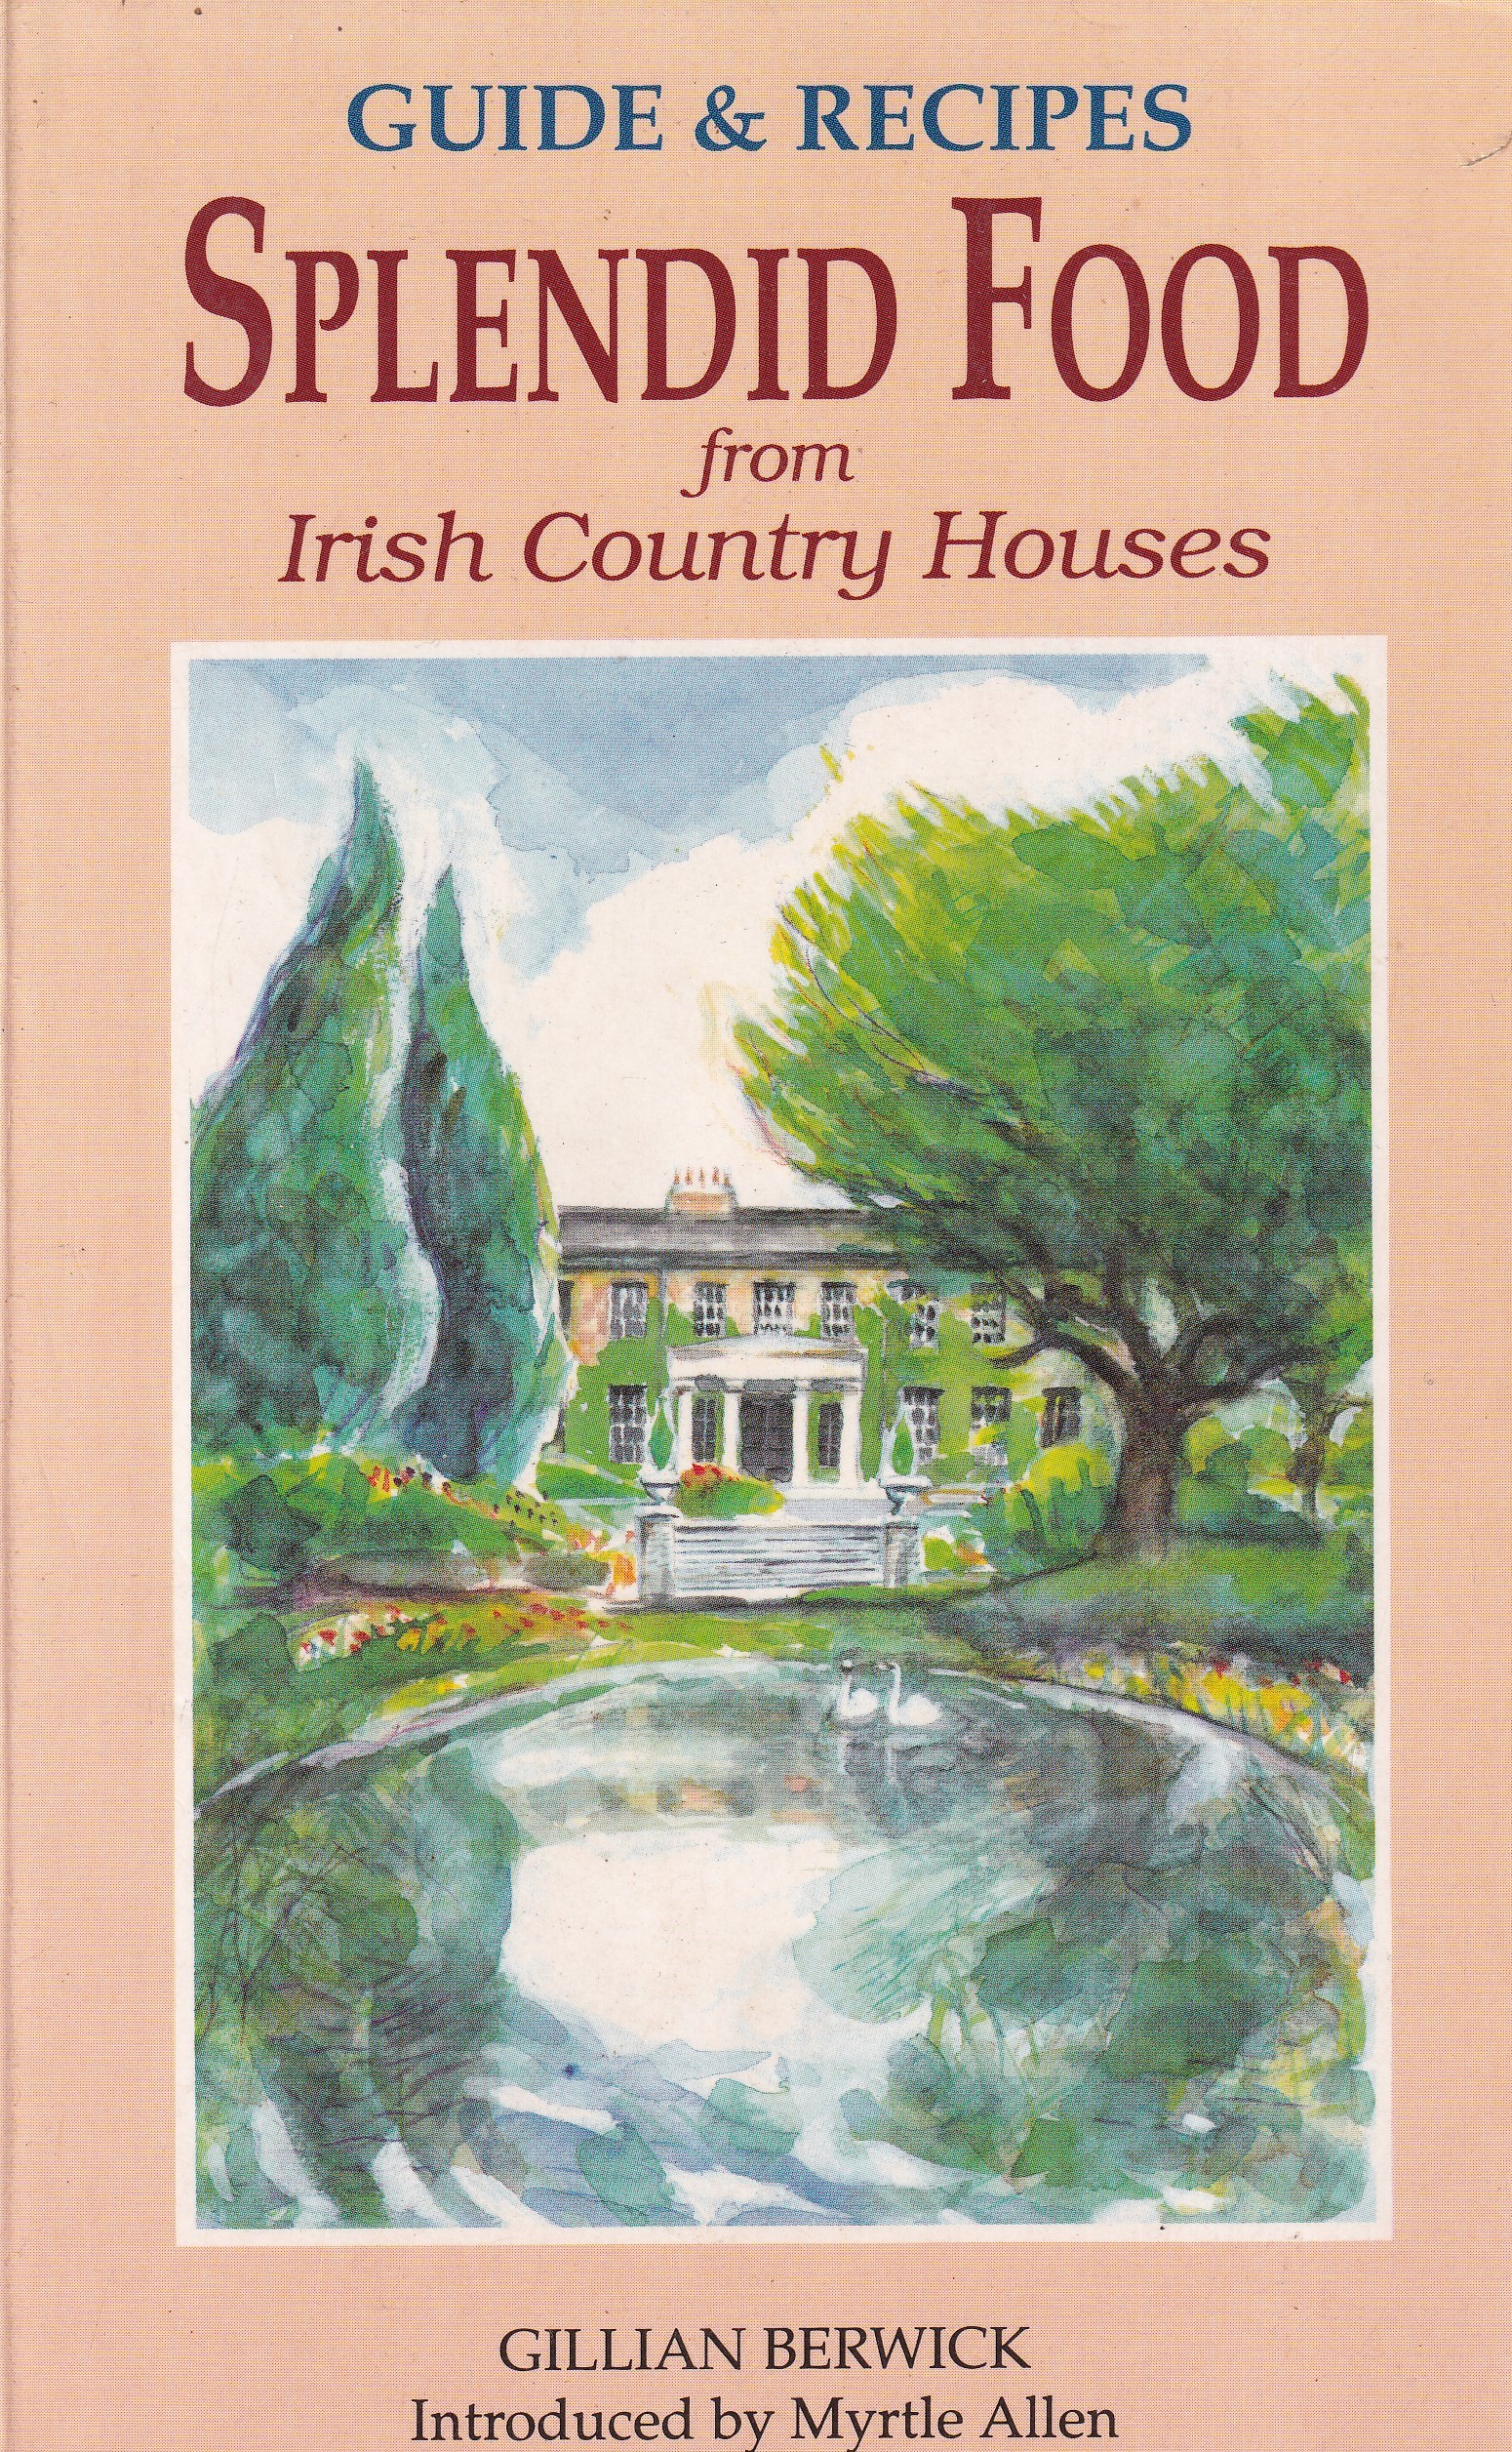 Splendid Food from Irish Country Houses: Guides and Recipes | Gillian Berwick | Charlie Byrne's